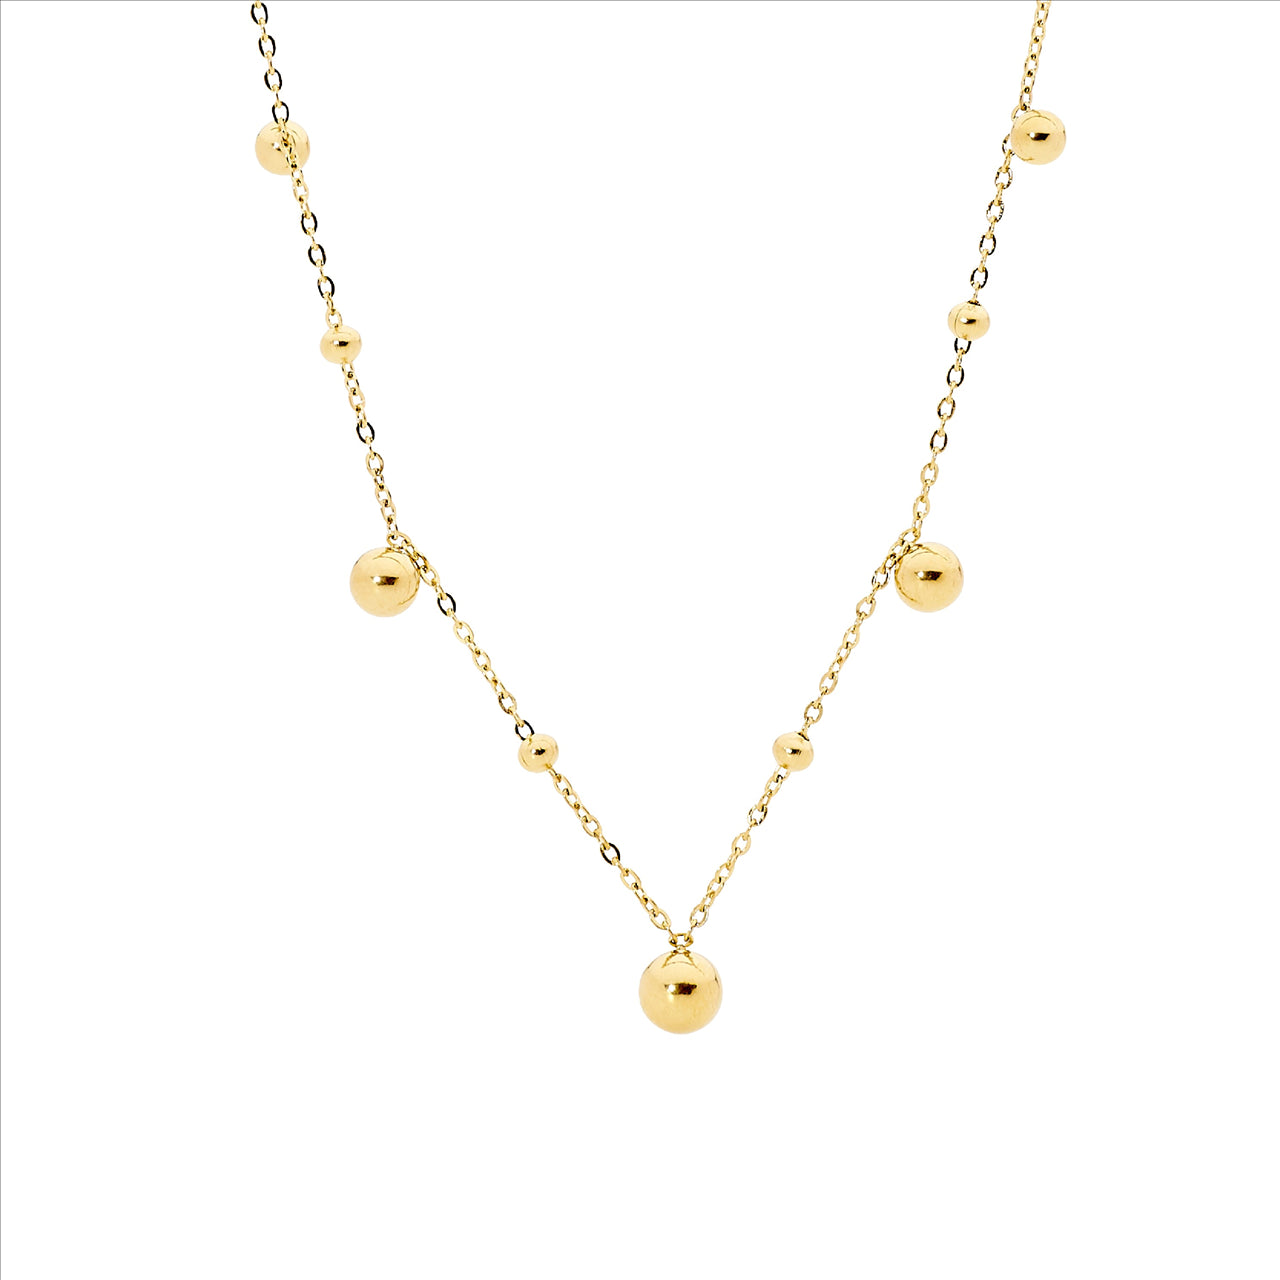 Stainless steel necklace 40+5cm w/ ball feature & gold IP plating